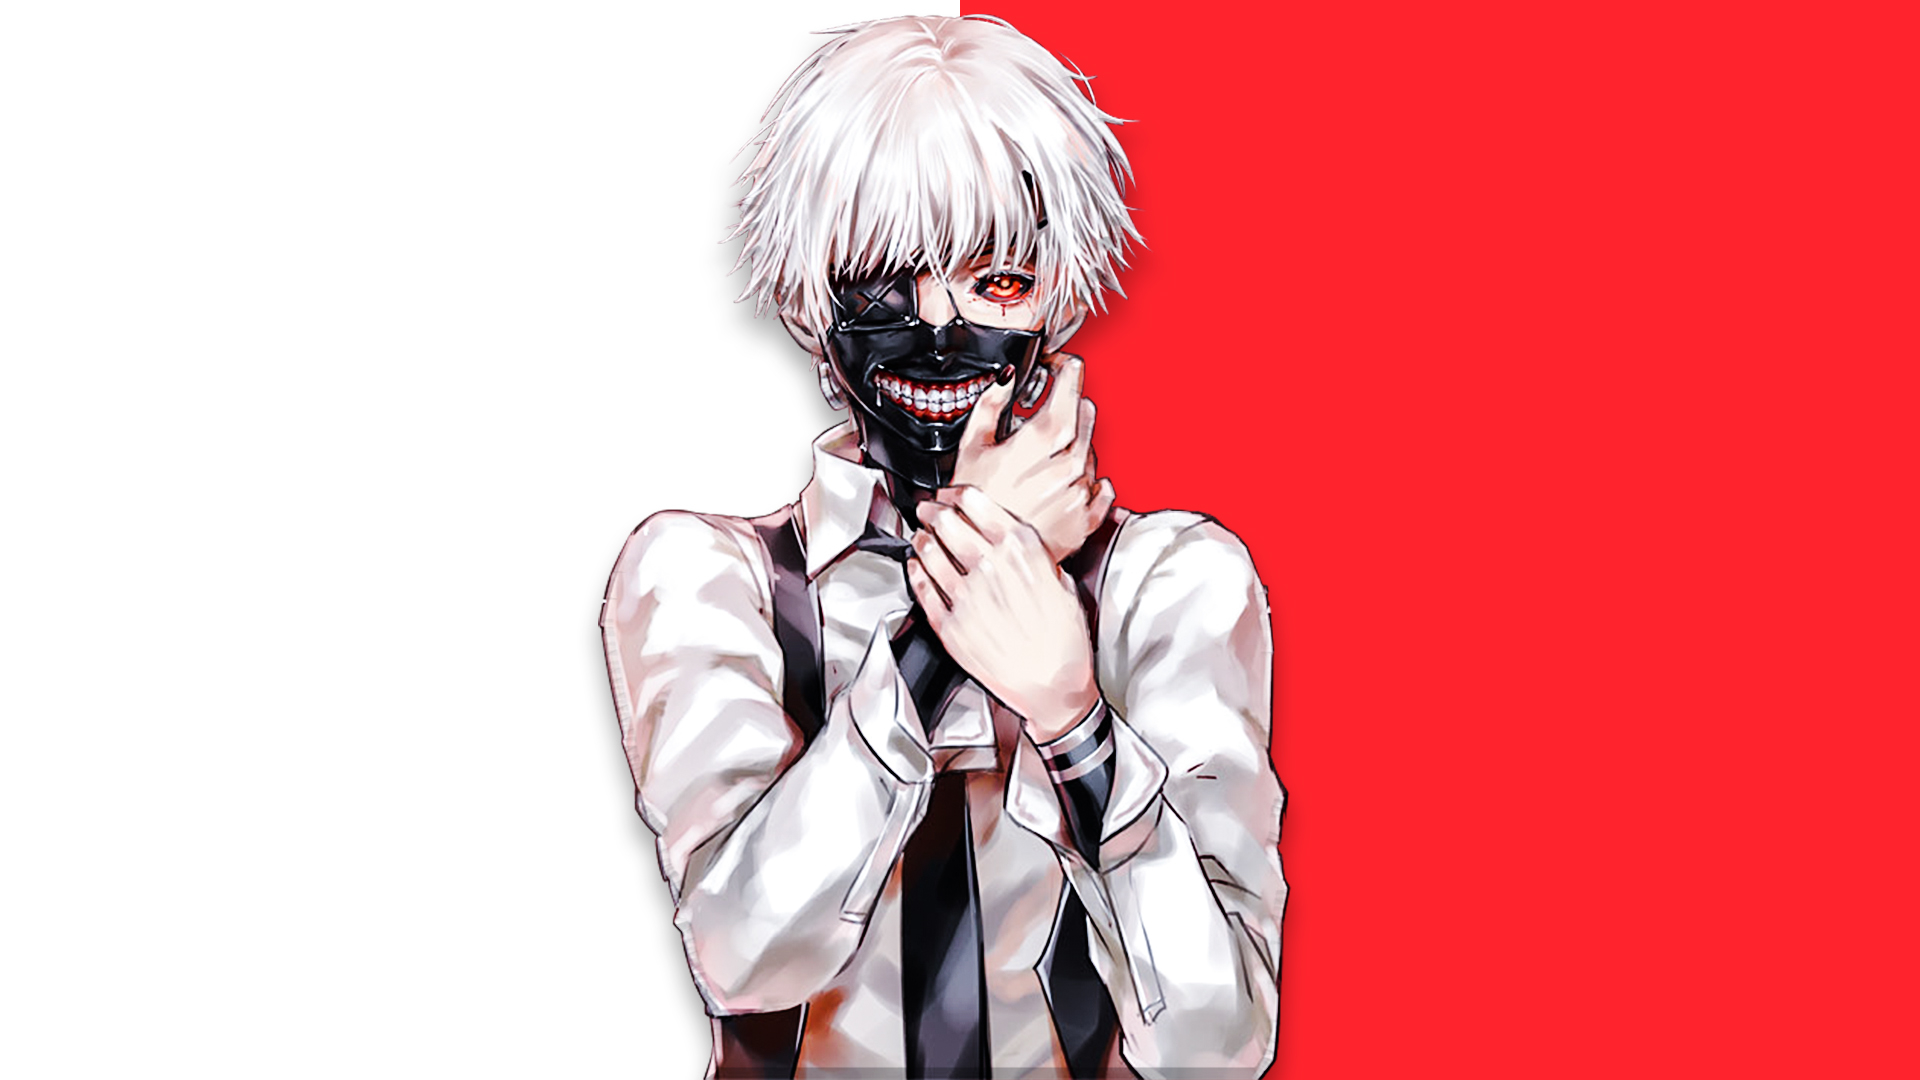 Tokio Ghoul Wallpaper / Tokyo Ghoul wallpaper HD ·① Download free cool backgrounds ... - Anime vocaloid 1k anime girls 3k christmas anime 22.